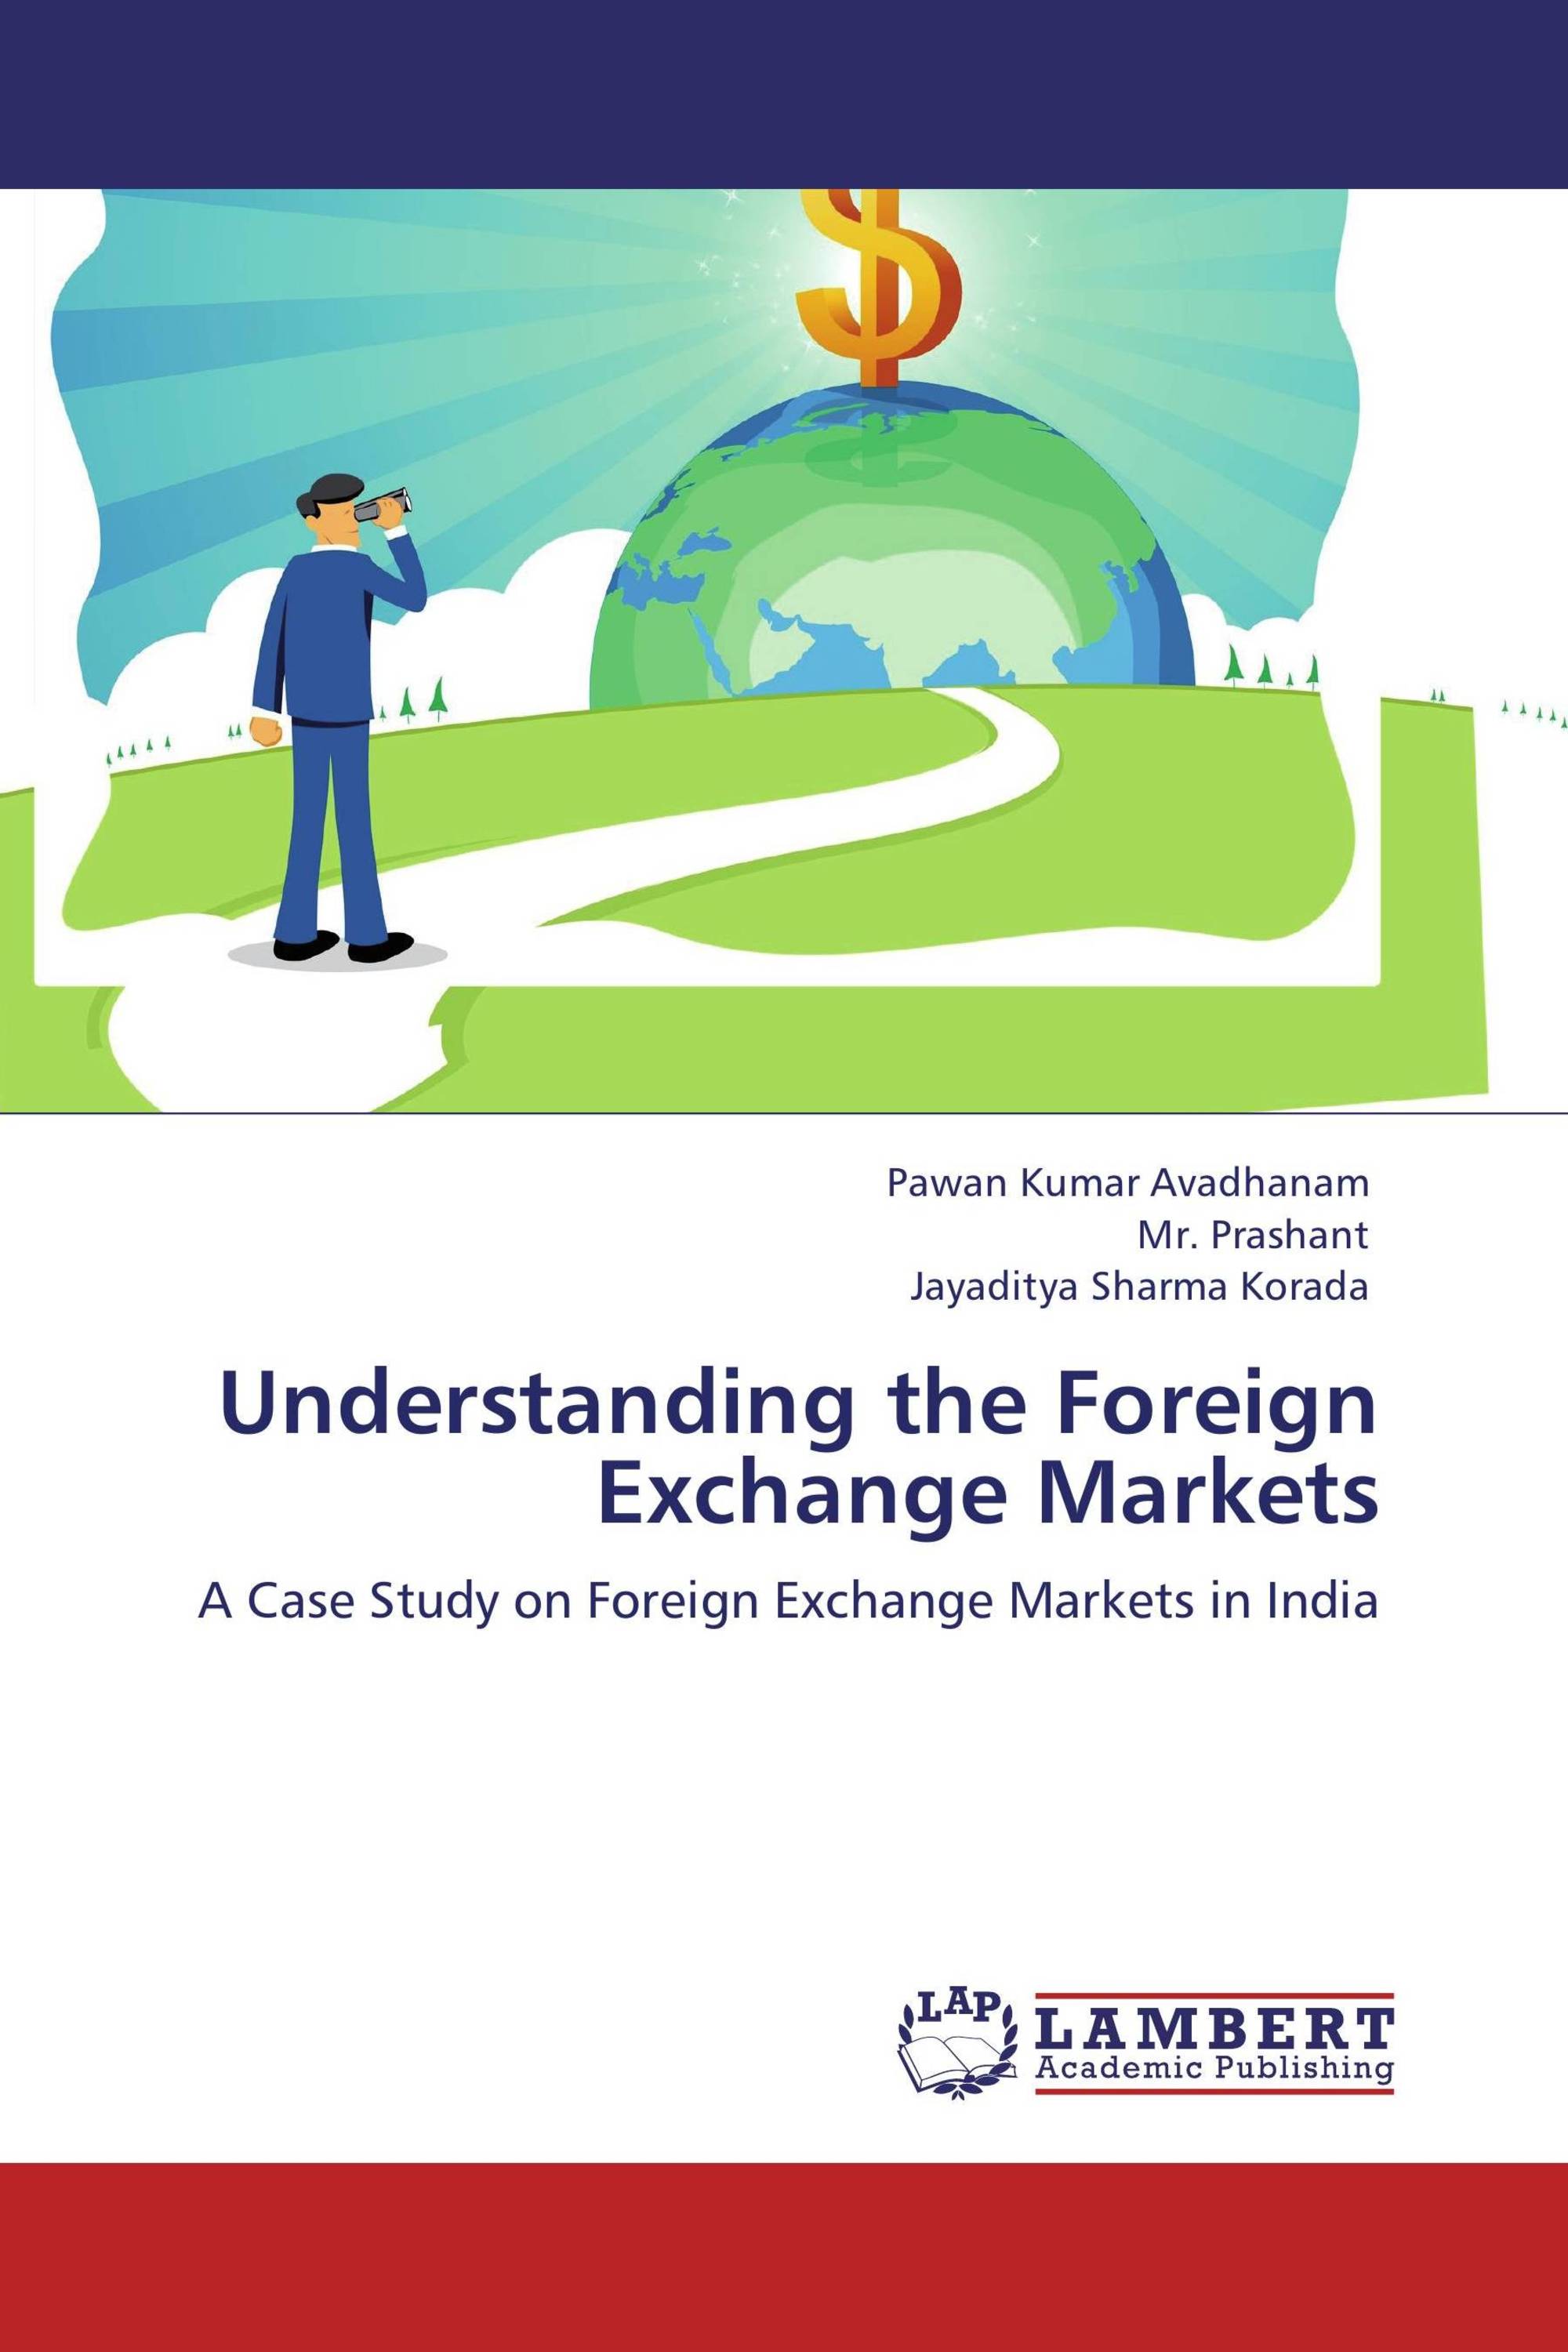 research topics on foreign exchange market